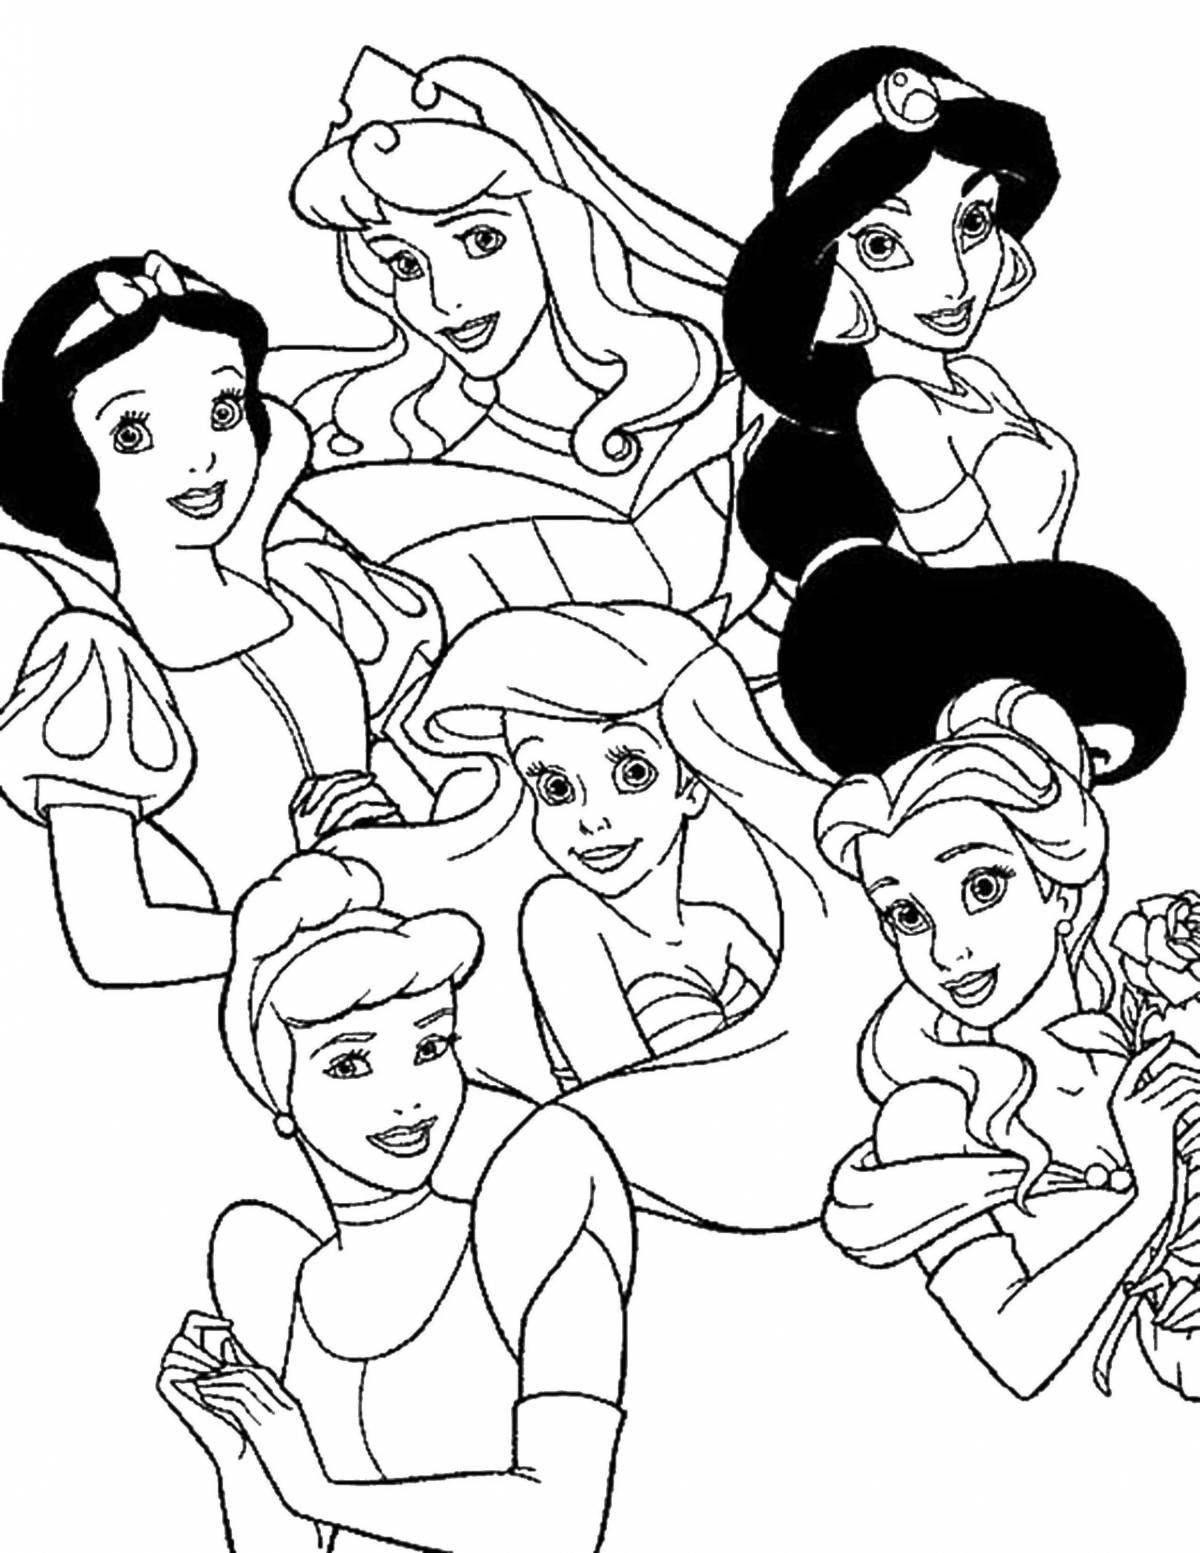 Dazzling coloring book for kids with disney princesses